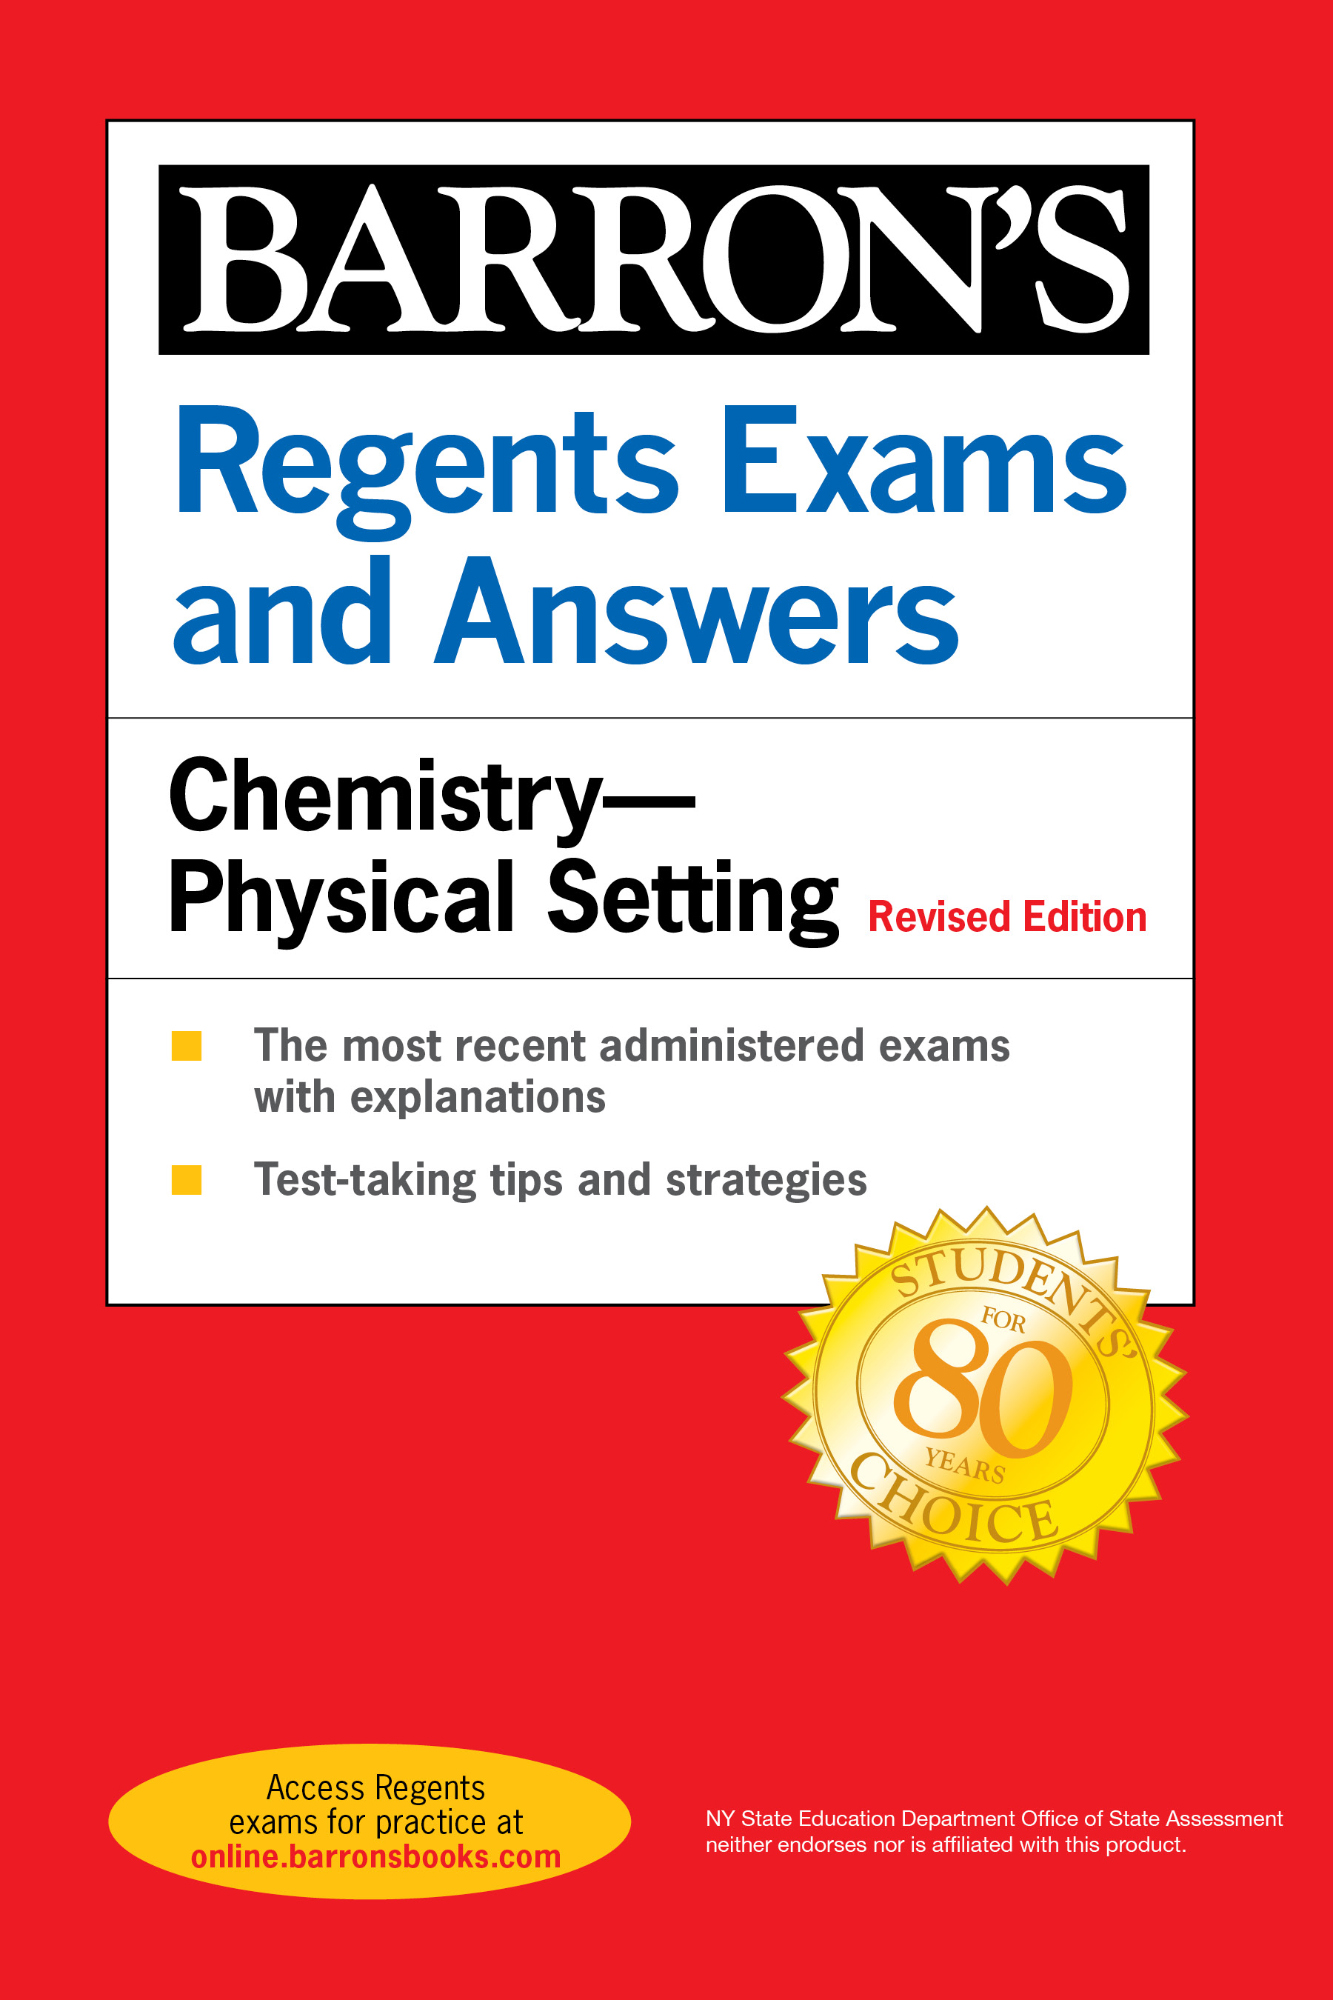 Barrons Regents Exams and Answers ChemistryPhysical Setting Revised Edition - photo 1